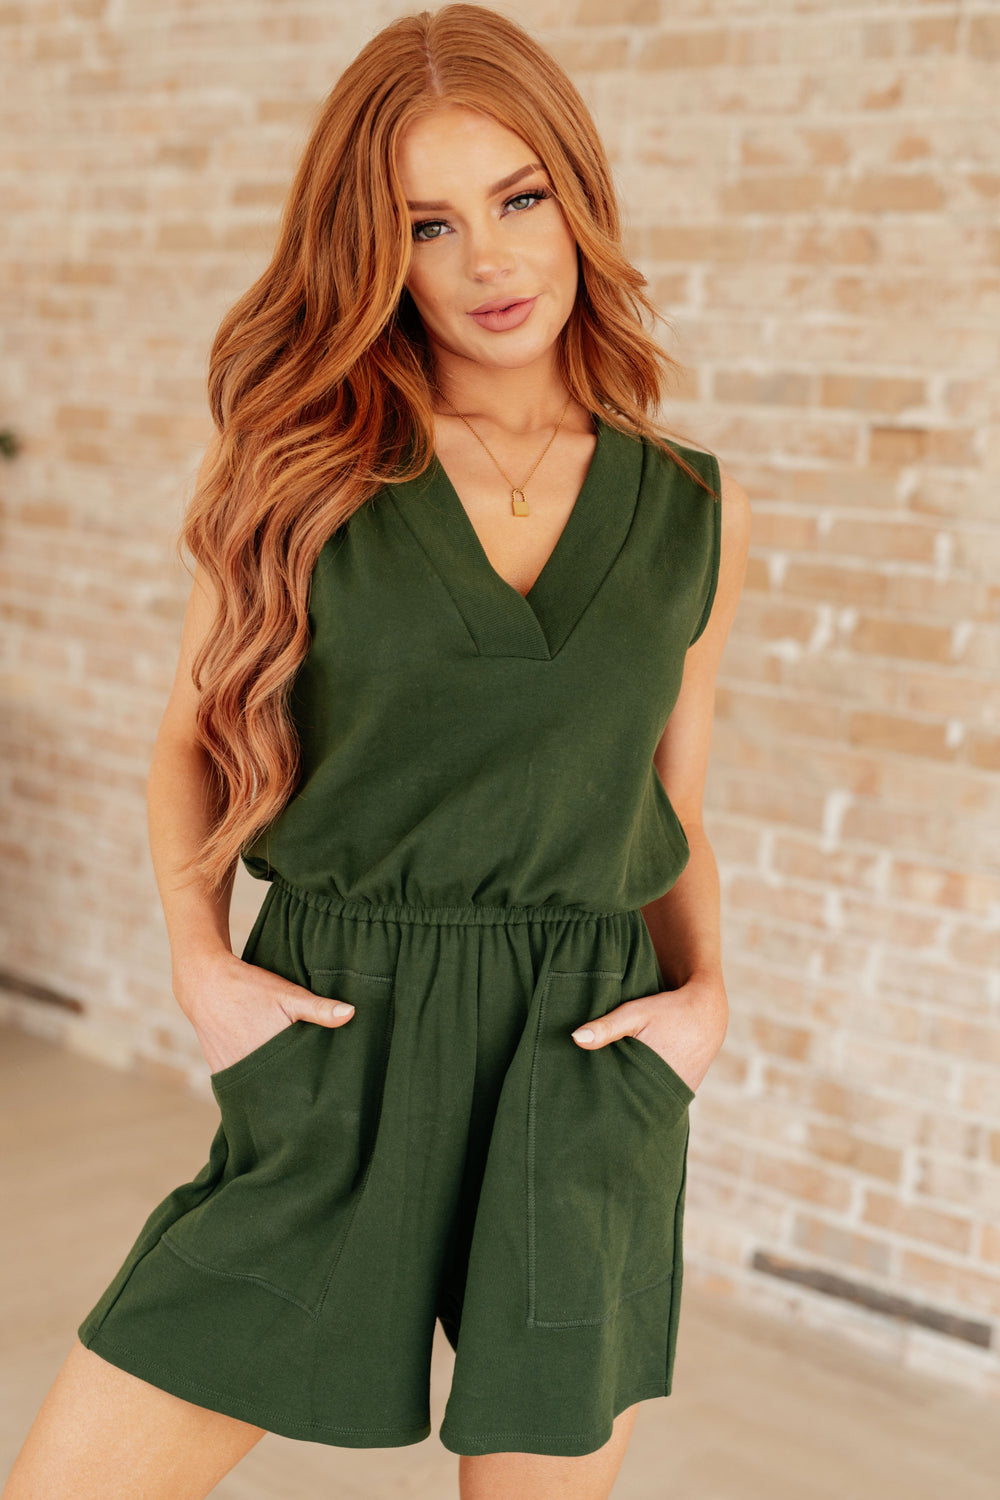 Sleeveless V-Neck Romper in Army Green-Jumpsuits & Rompers-Inspired by Justeen-Women's Clothing Boutique in Chicago, Illinois